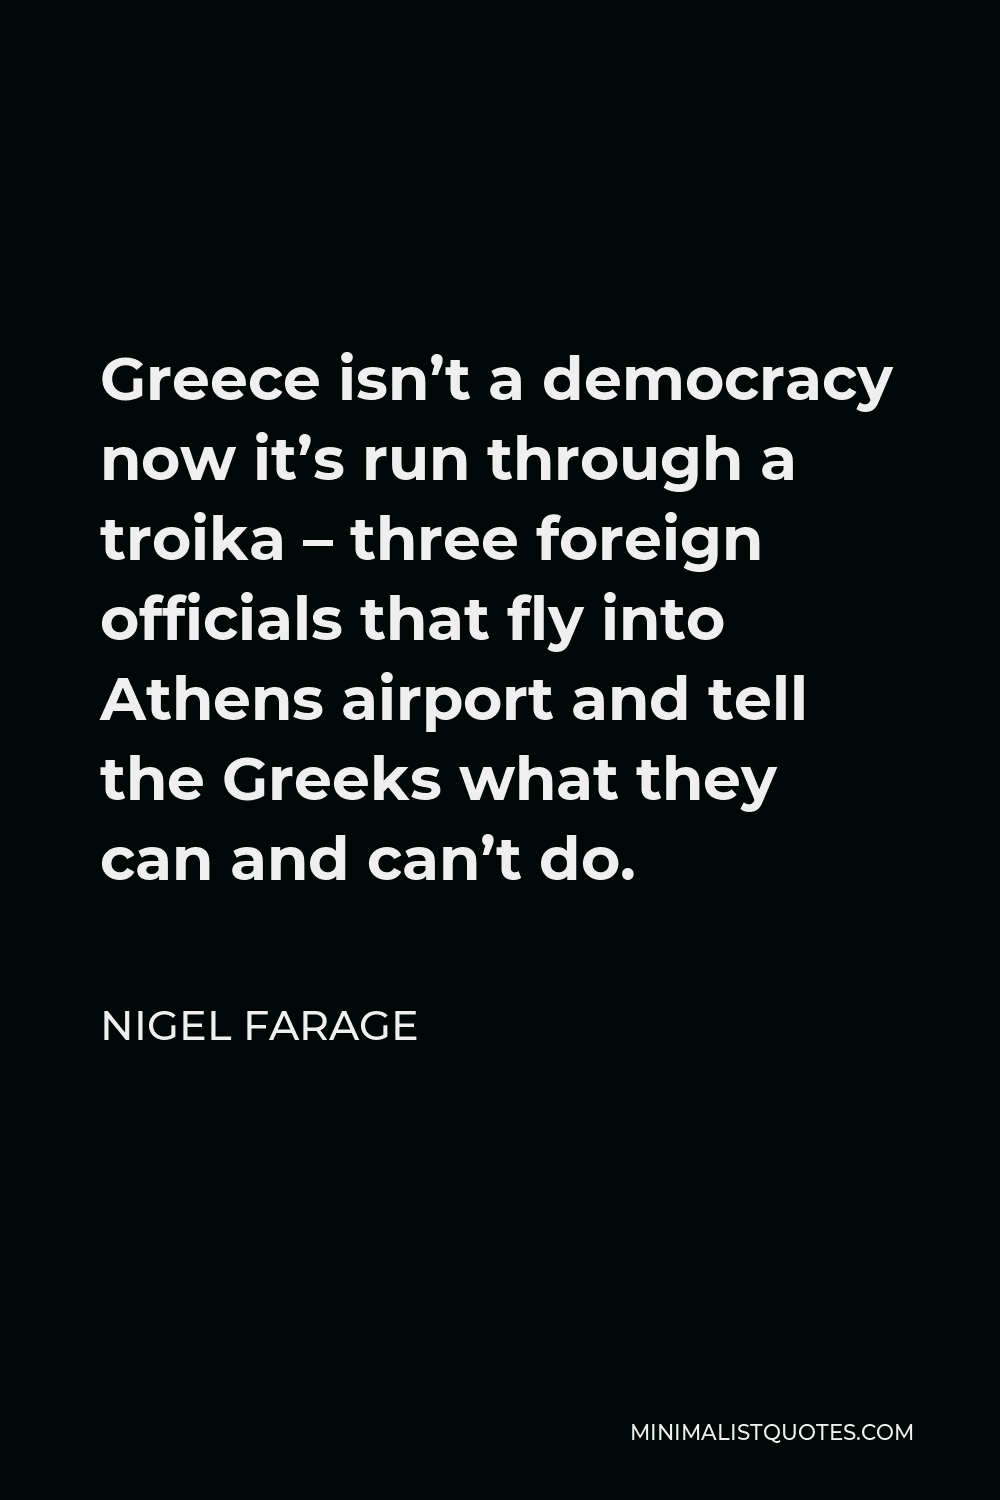 Nigel Farage Quote - Greece isn’t a democracy now it’s run through a troika – three foreign officials that fly into Athens airport and tell the Greeks what they can and can’t do.